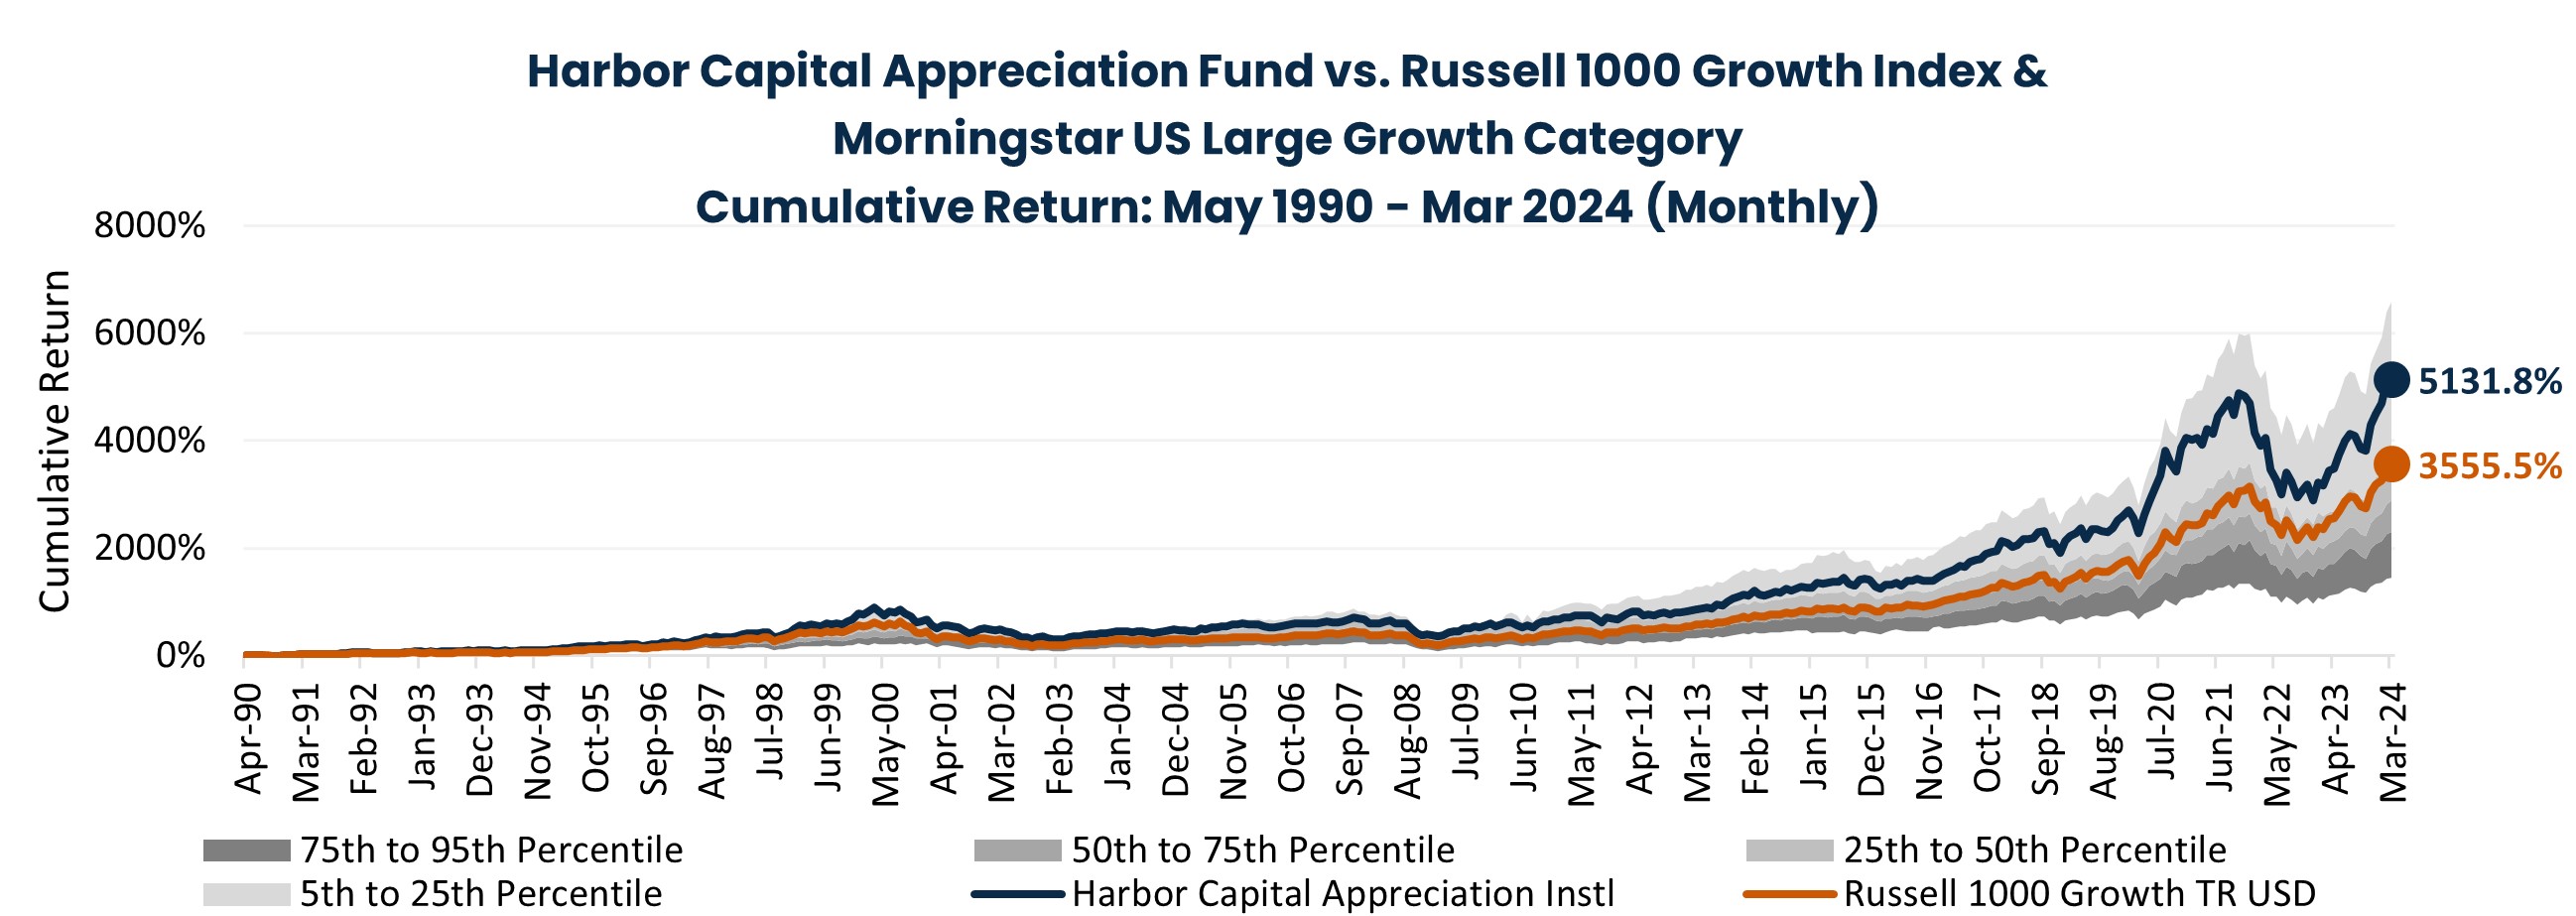 Harbor Capital Appreciation Fund vs. Russell 1000 Growth Index & Morningstar US Large Growth Category Cumulative Return: May 1990 - Mar 2024 (Monthly)